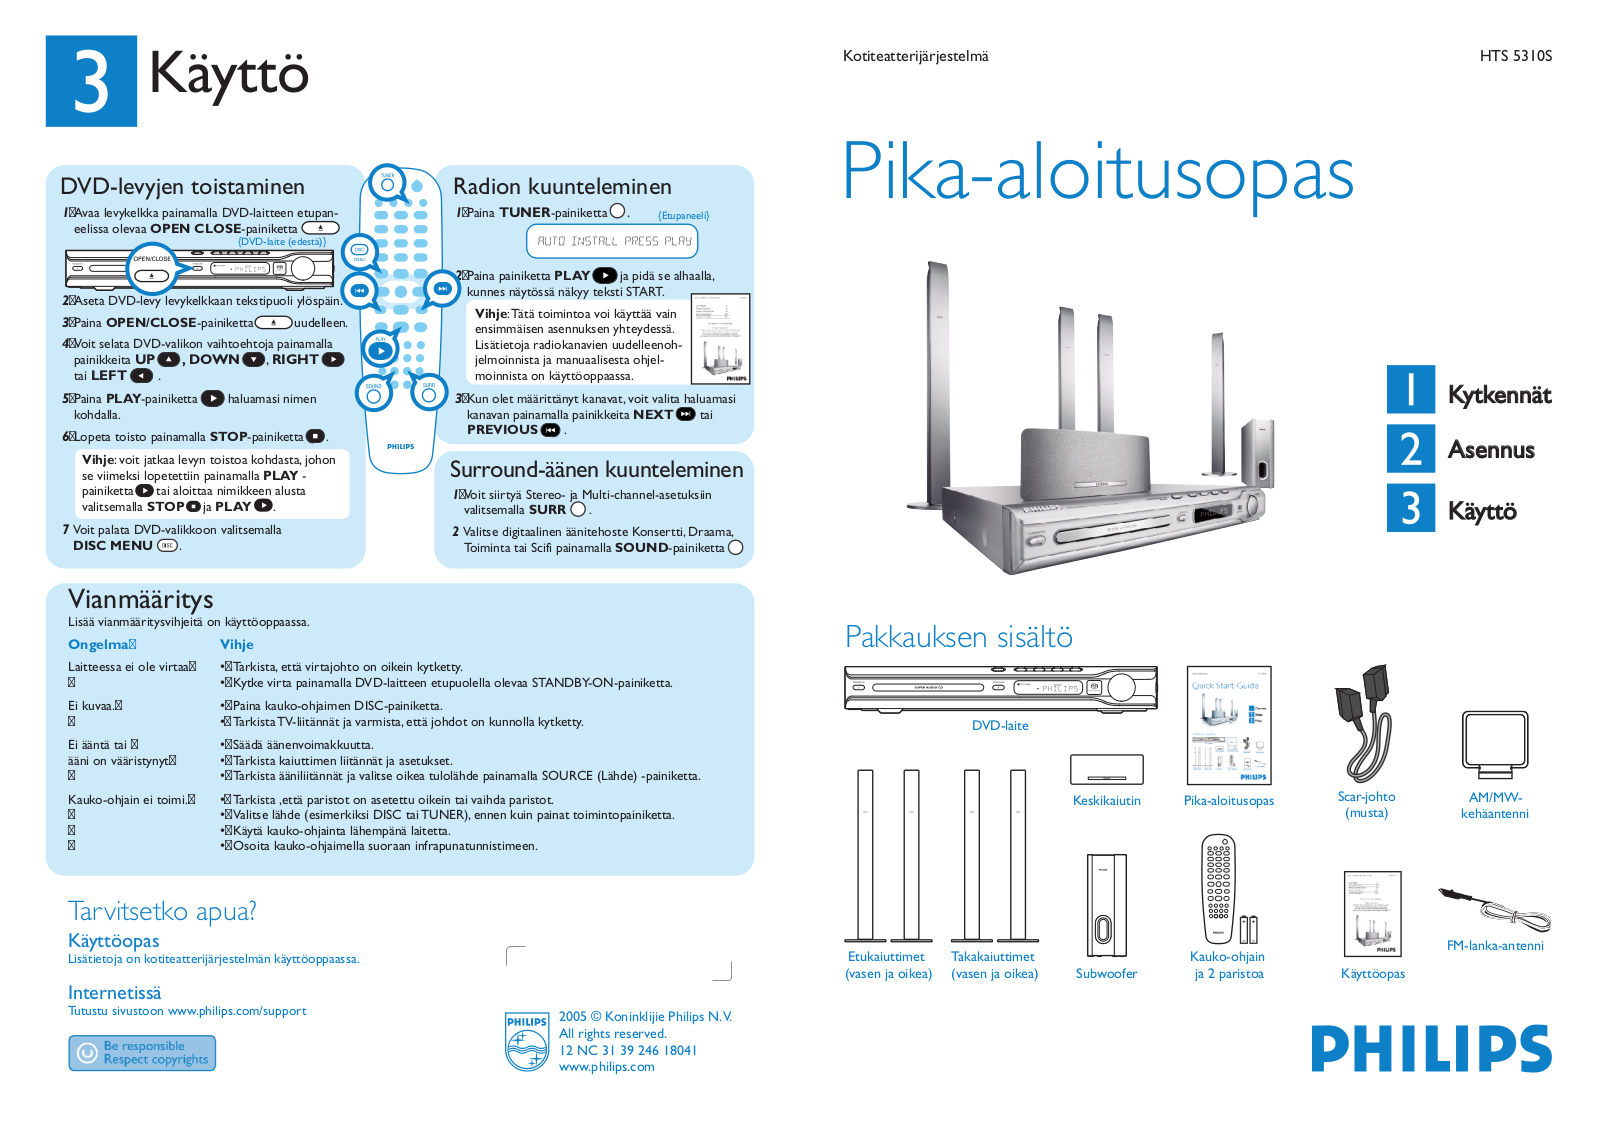 Philips HTS 5310S Getting Started Guide